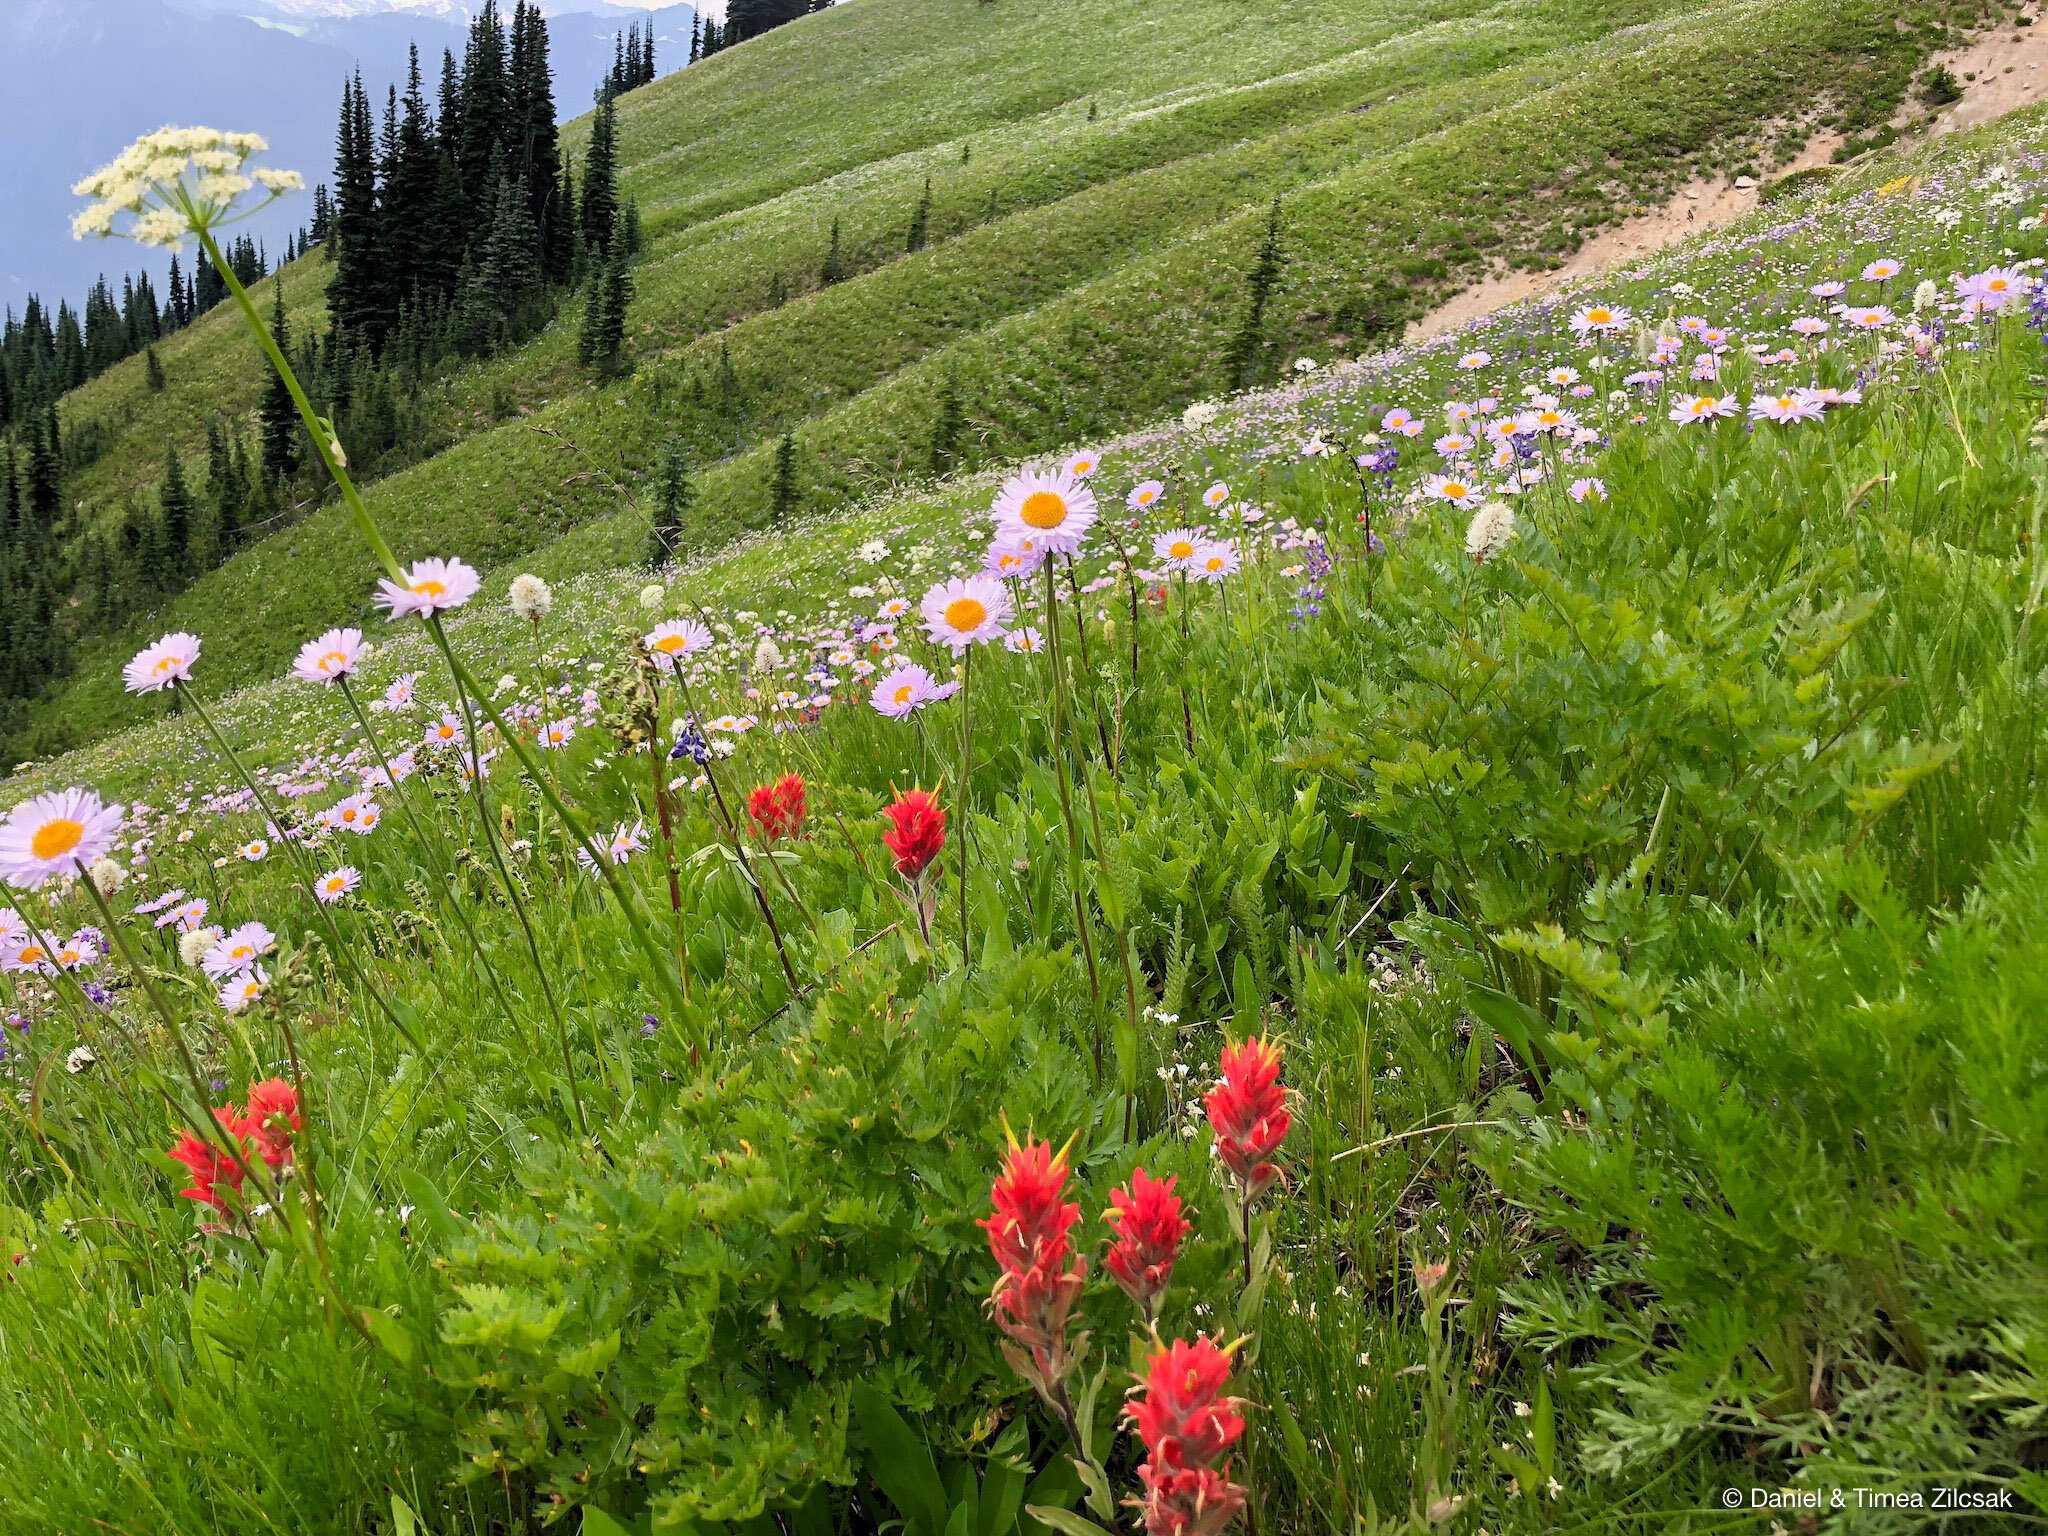 Flower meadows from Lady Camp to Image Lake - Backpacking Spider Gap